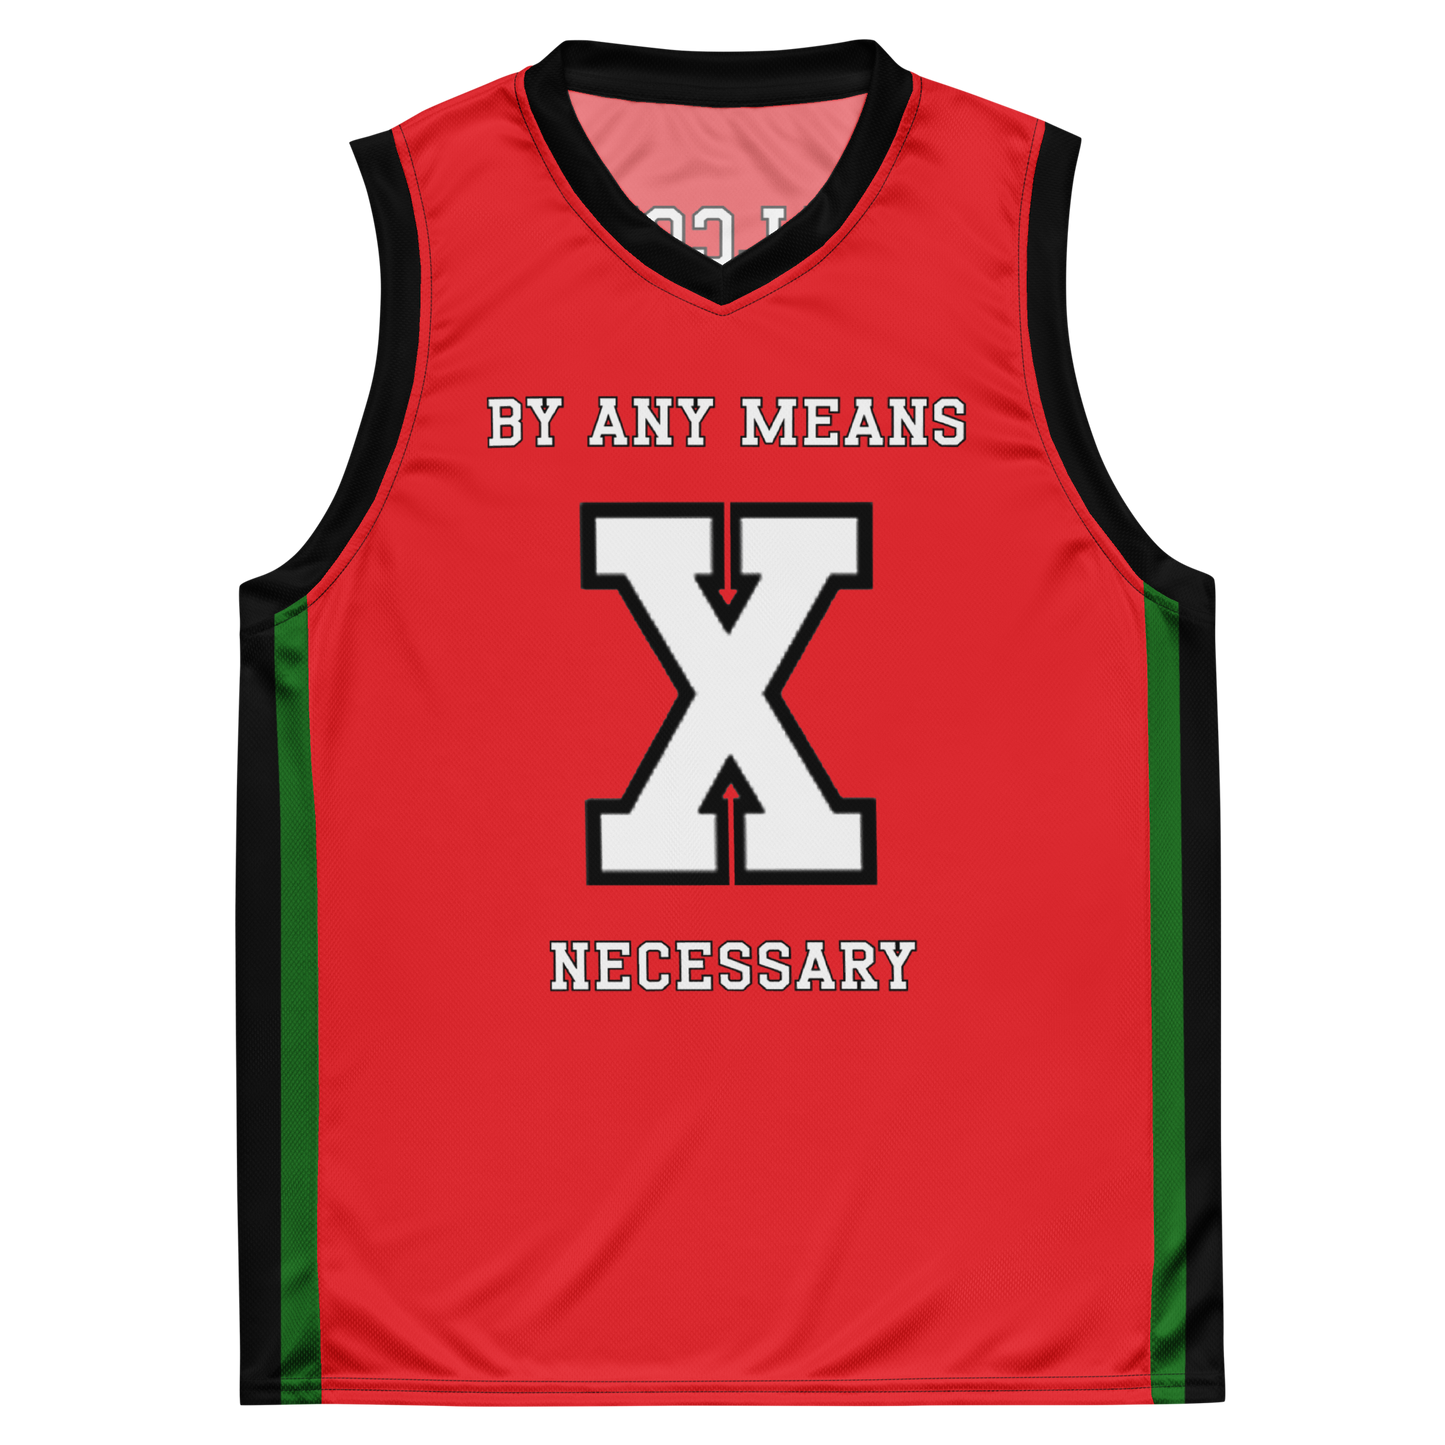 Malcolm X Recycled Basketball Jersey